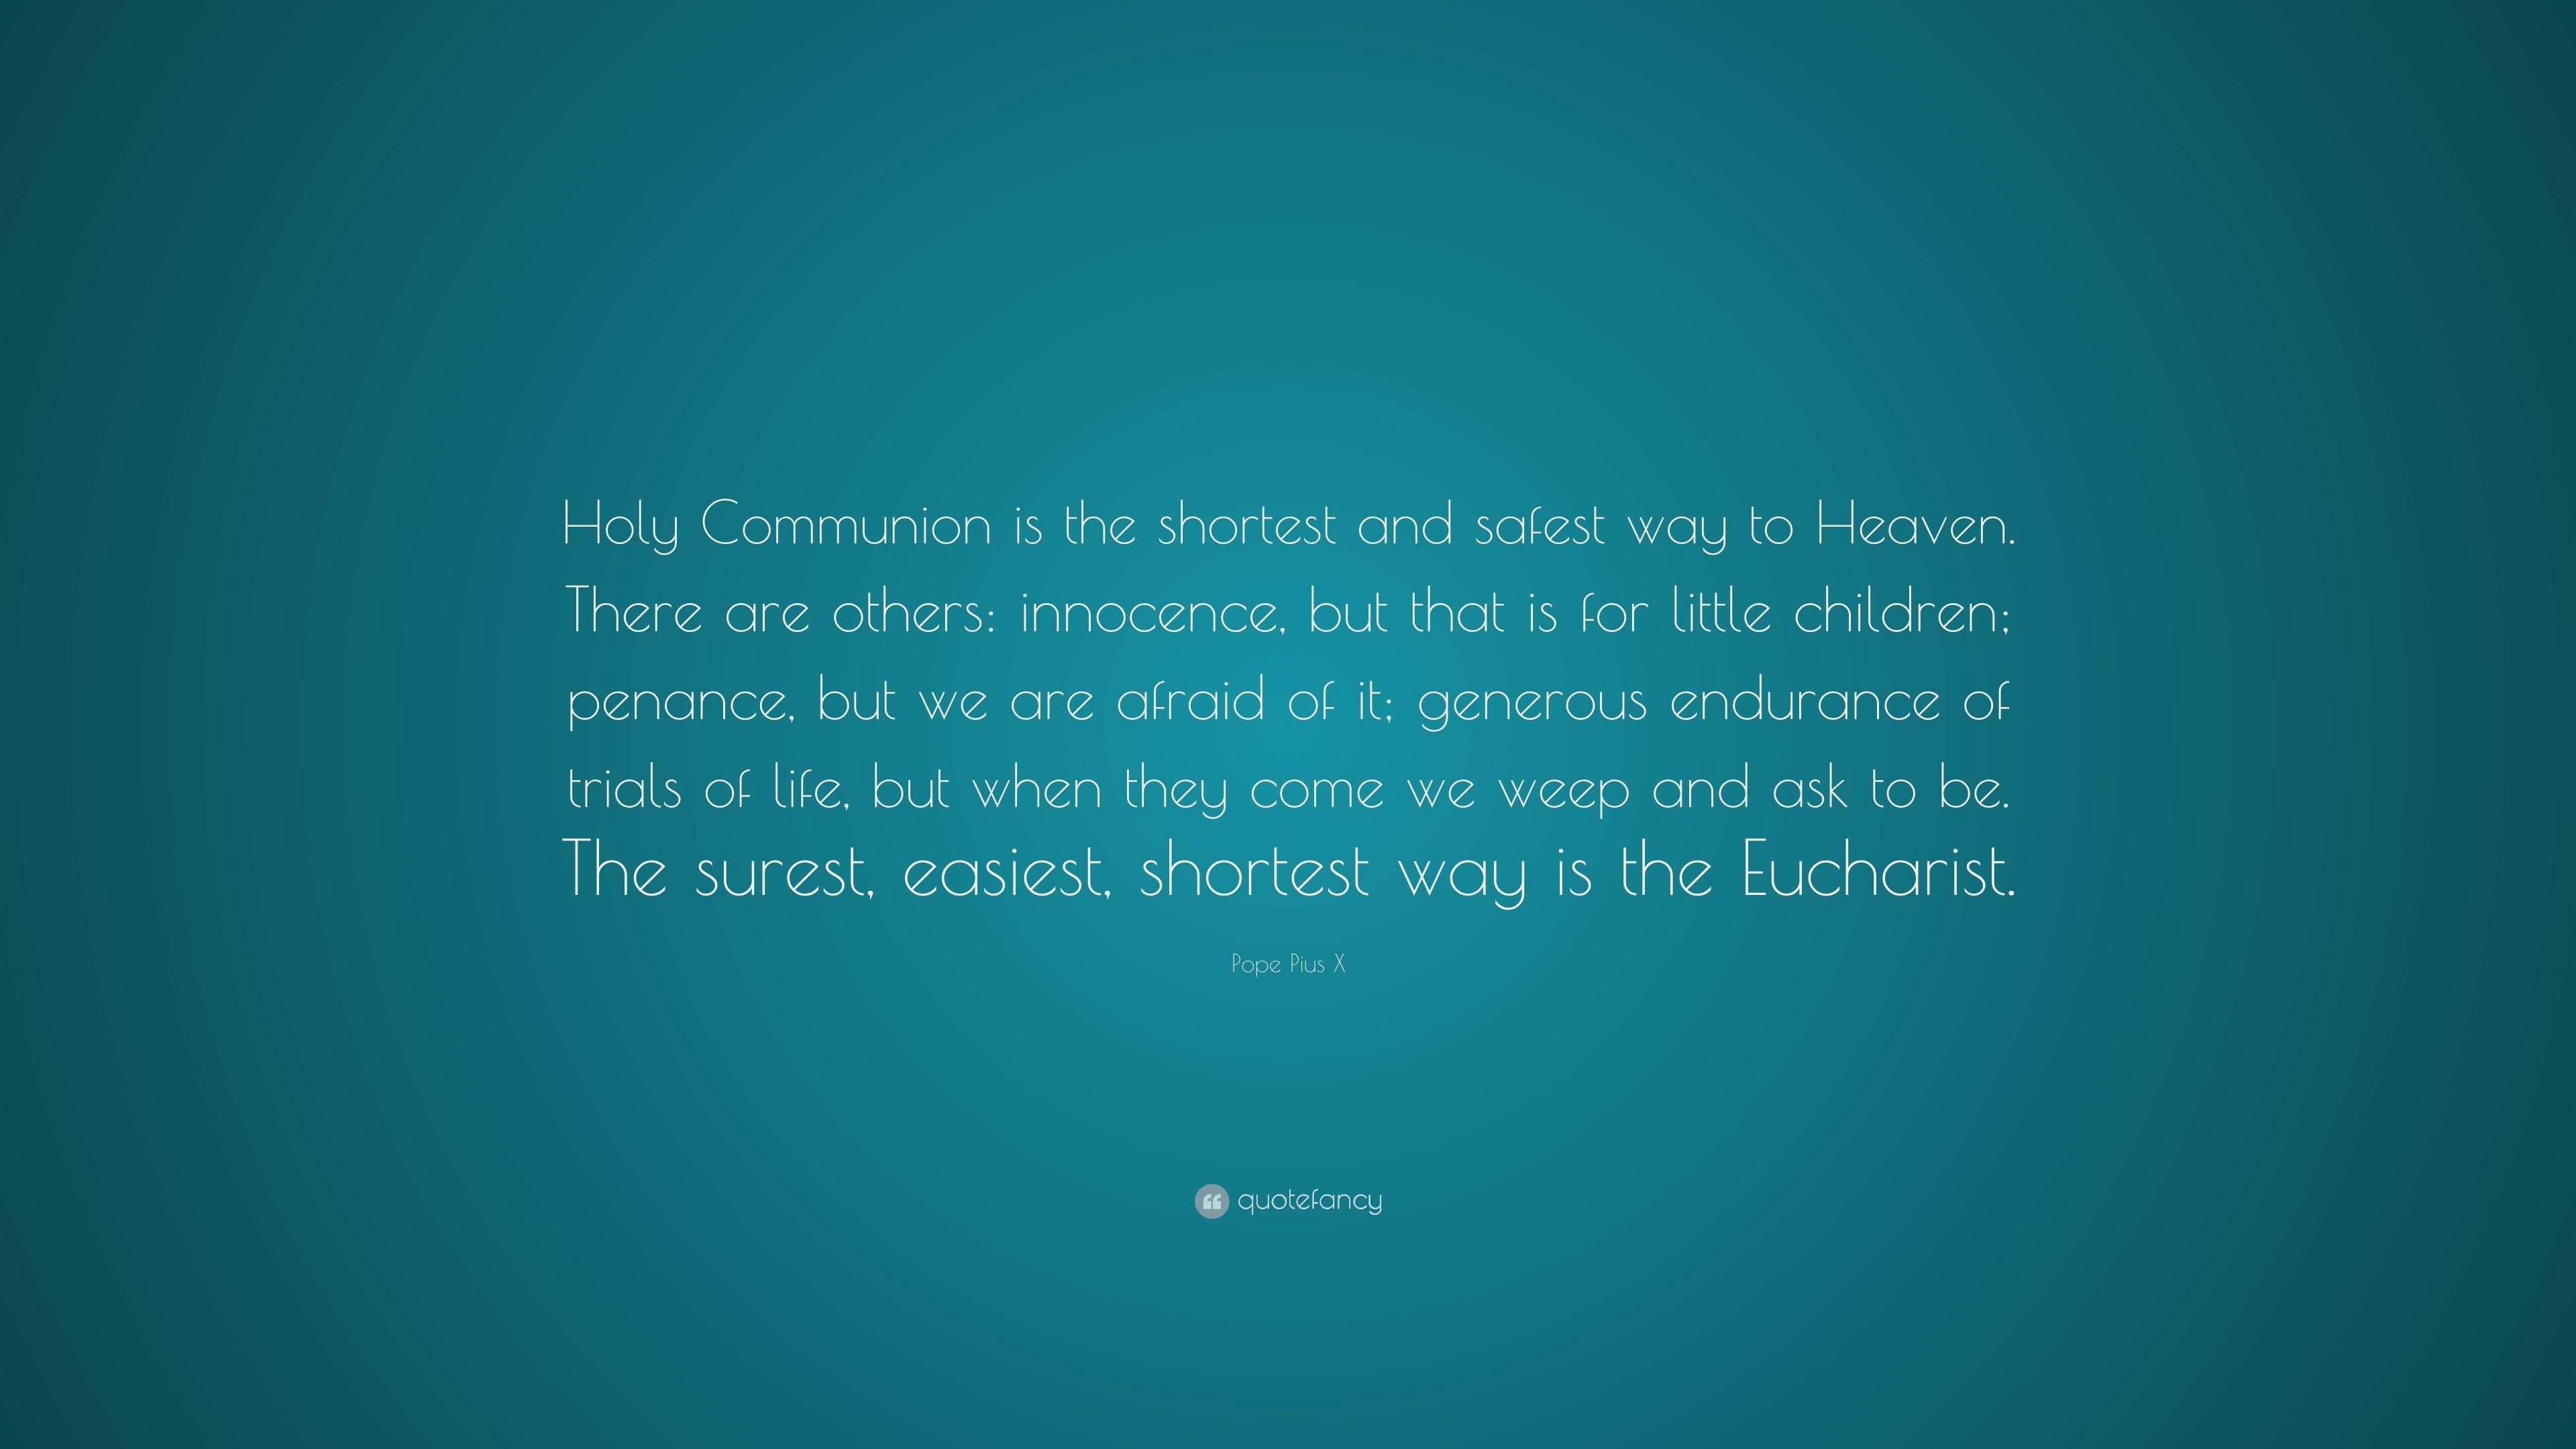 Pope Pius X Quote: “Holy Communion is the shortest and safest way